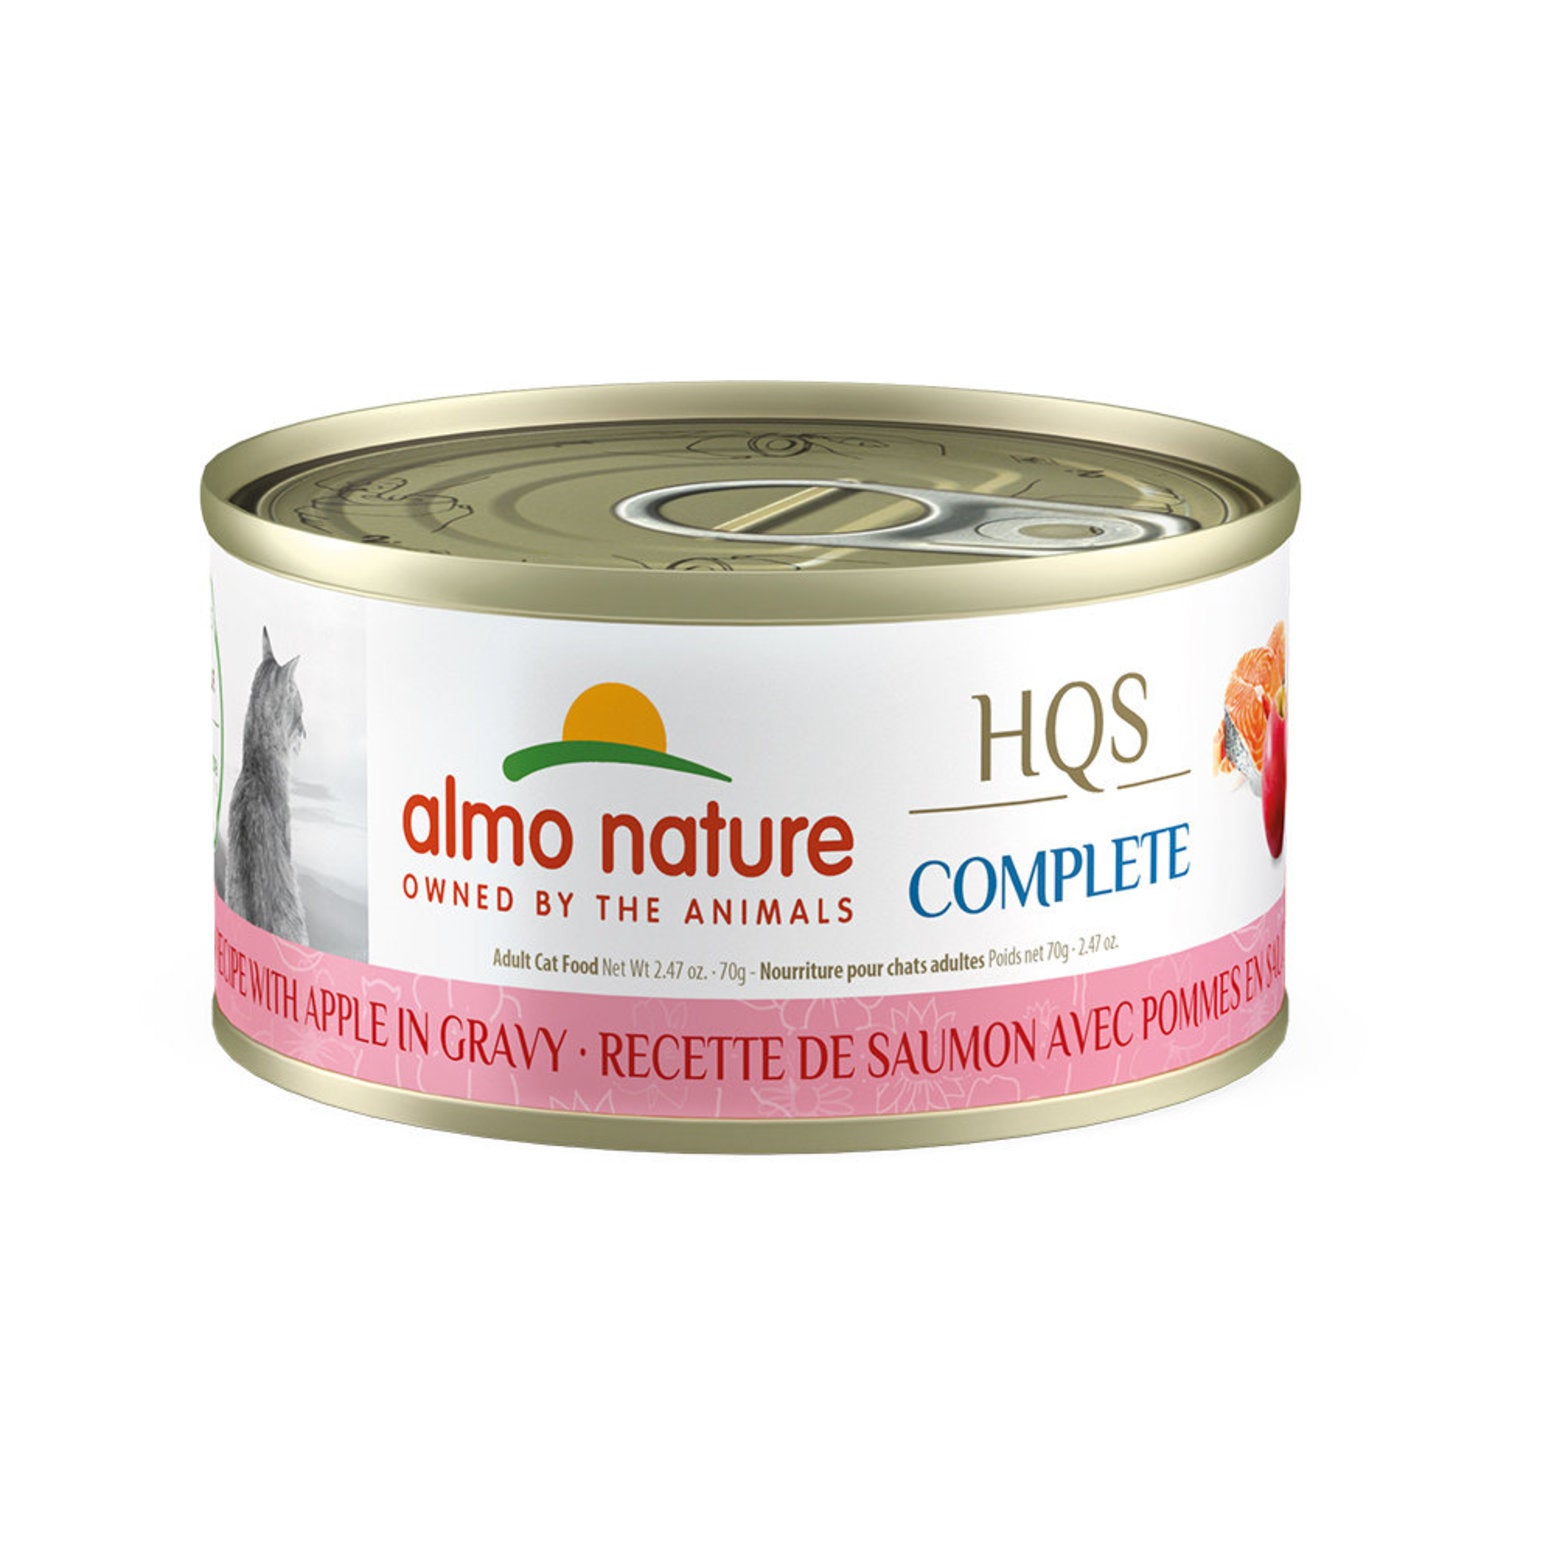 Almo Nature - HQS Complete Salmon Recipe with Apple in Gravy (Wet Cat Food)